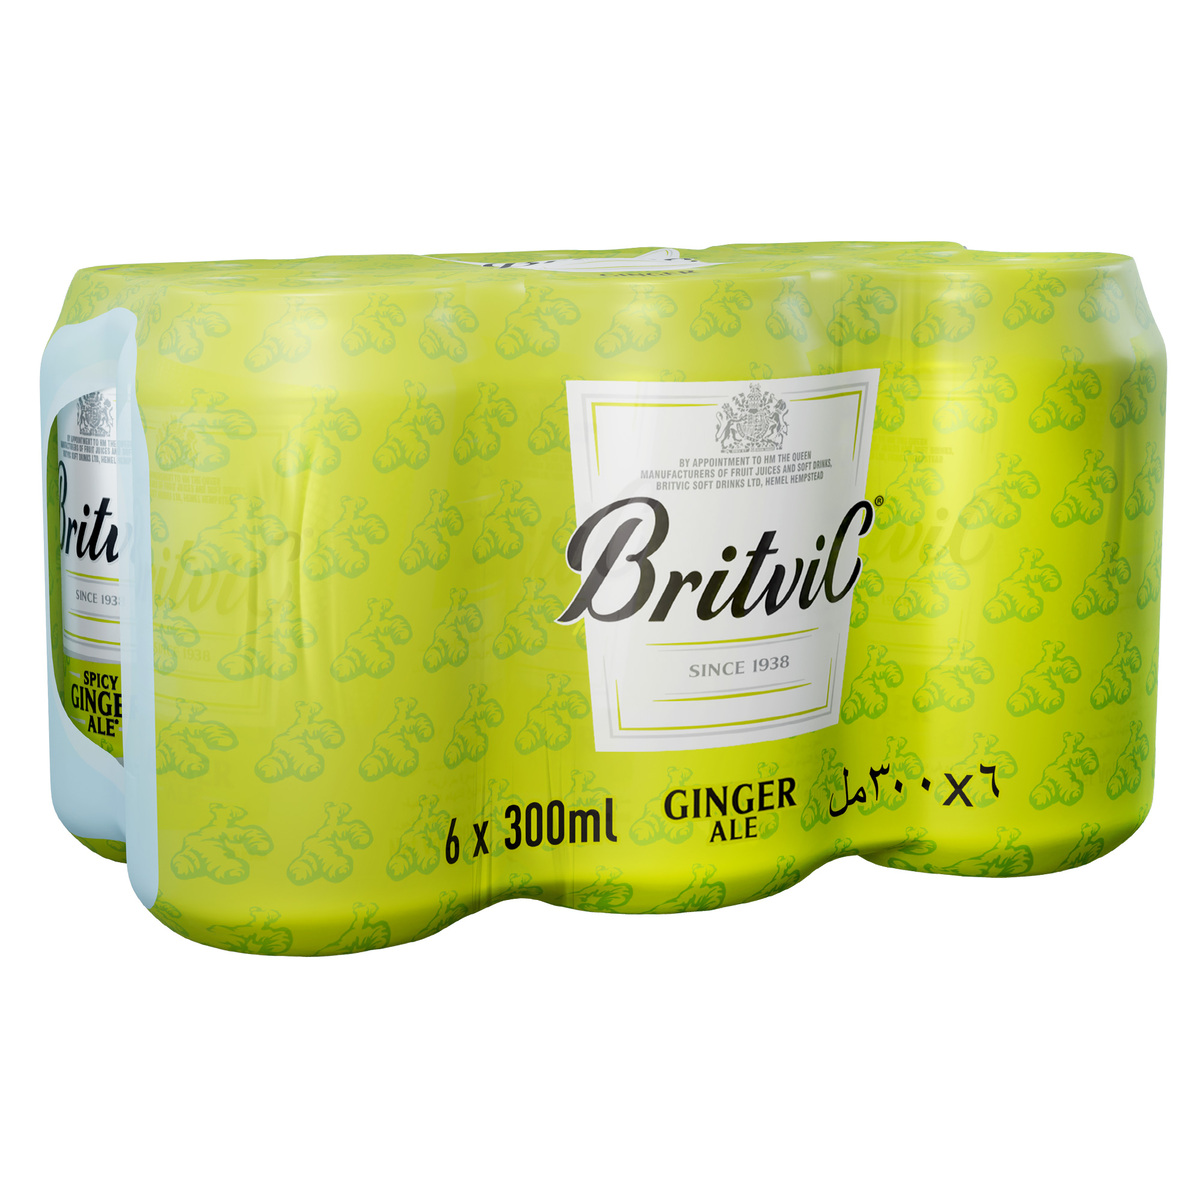 Britvic Spicy Ginger Ale 6 x 300 ml